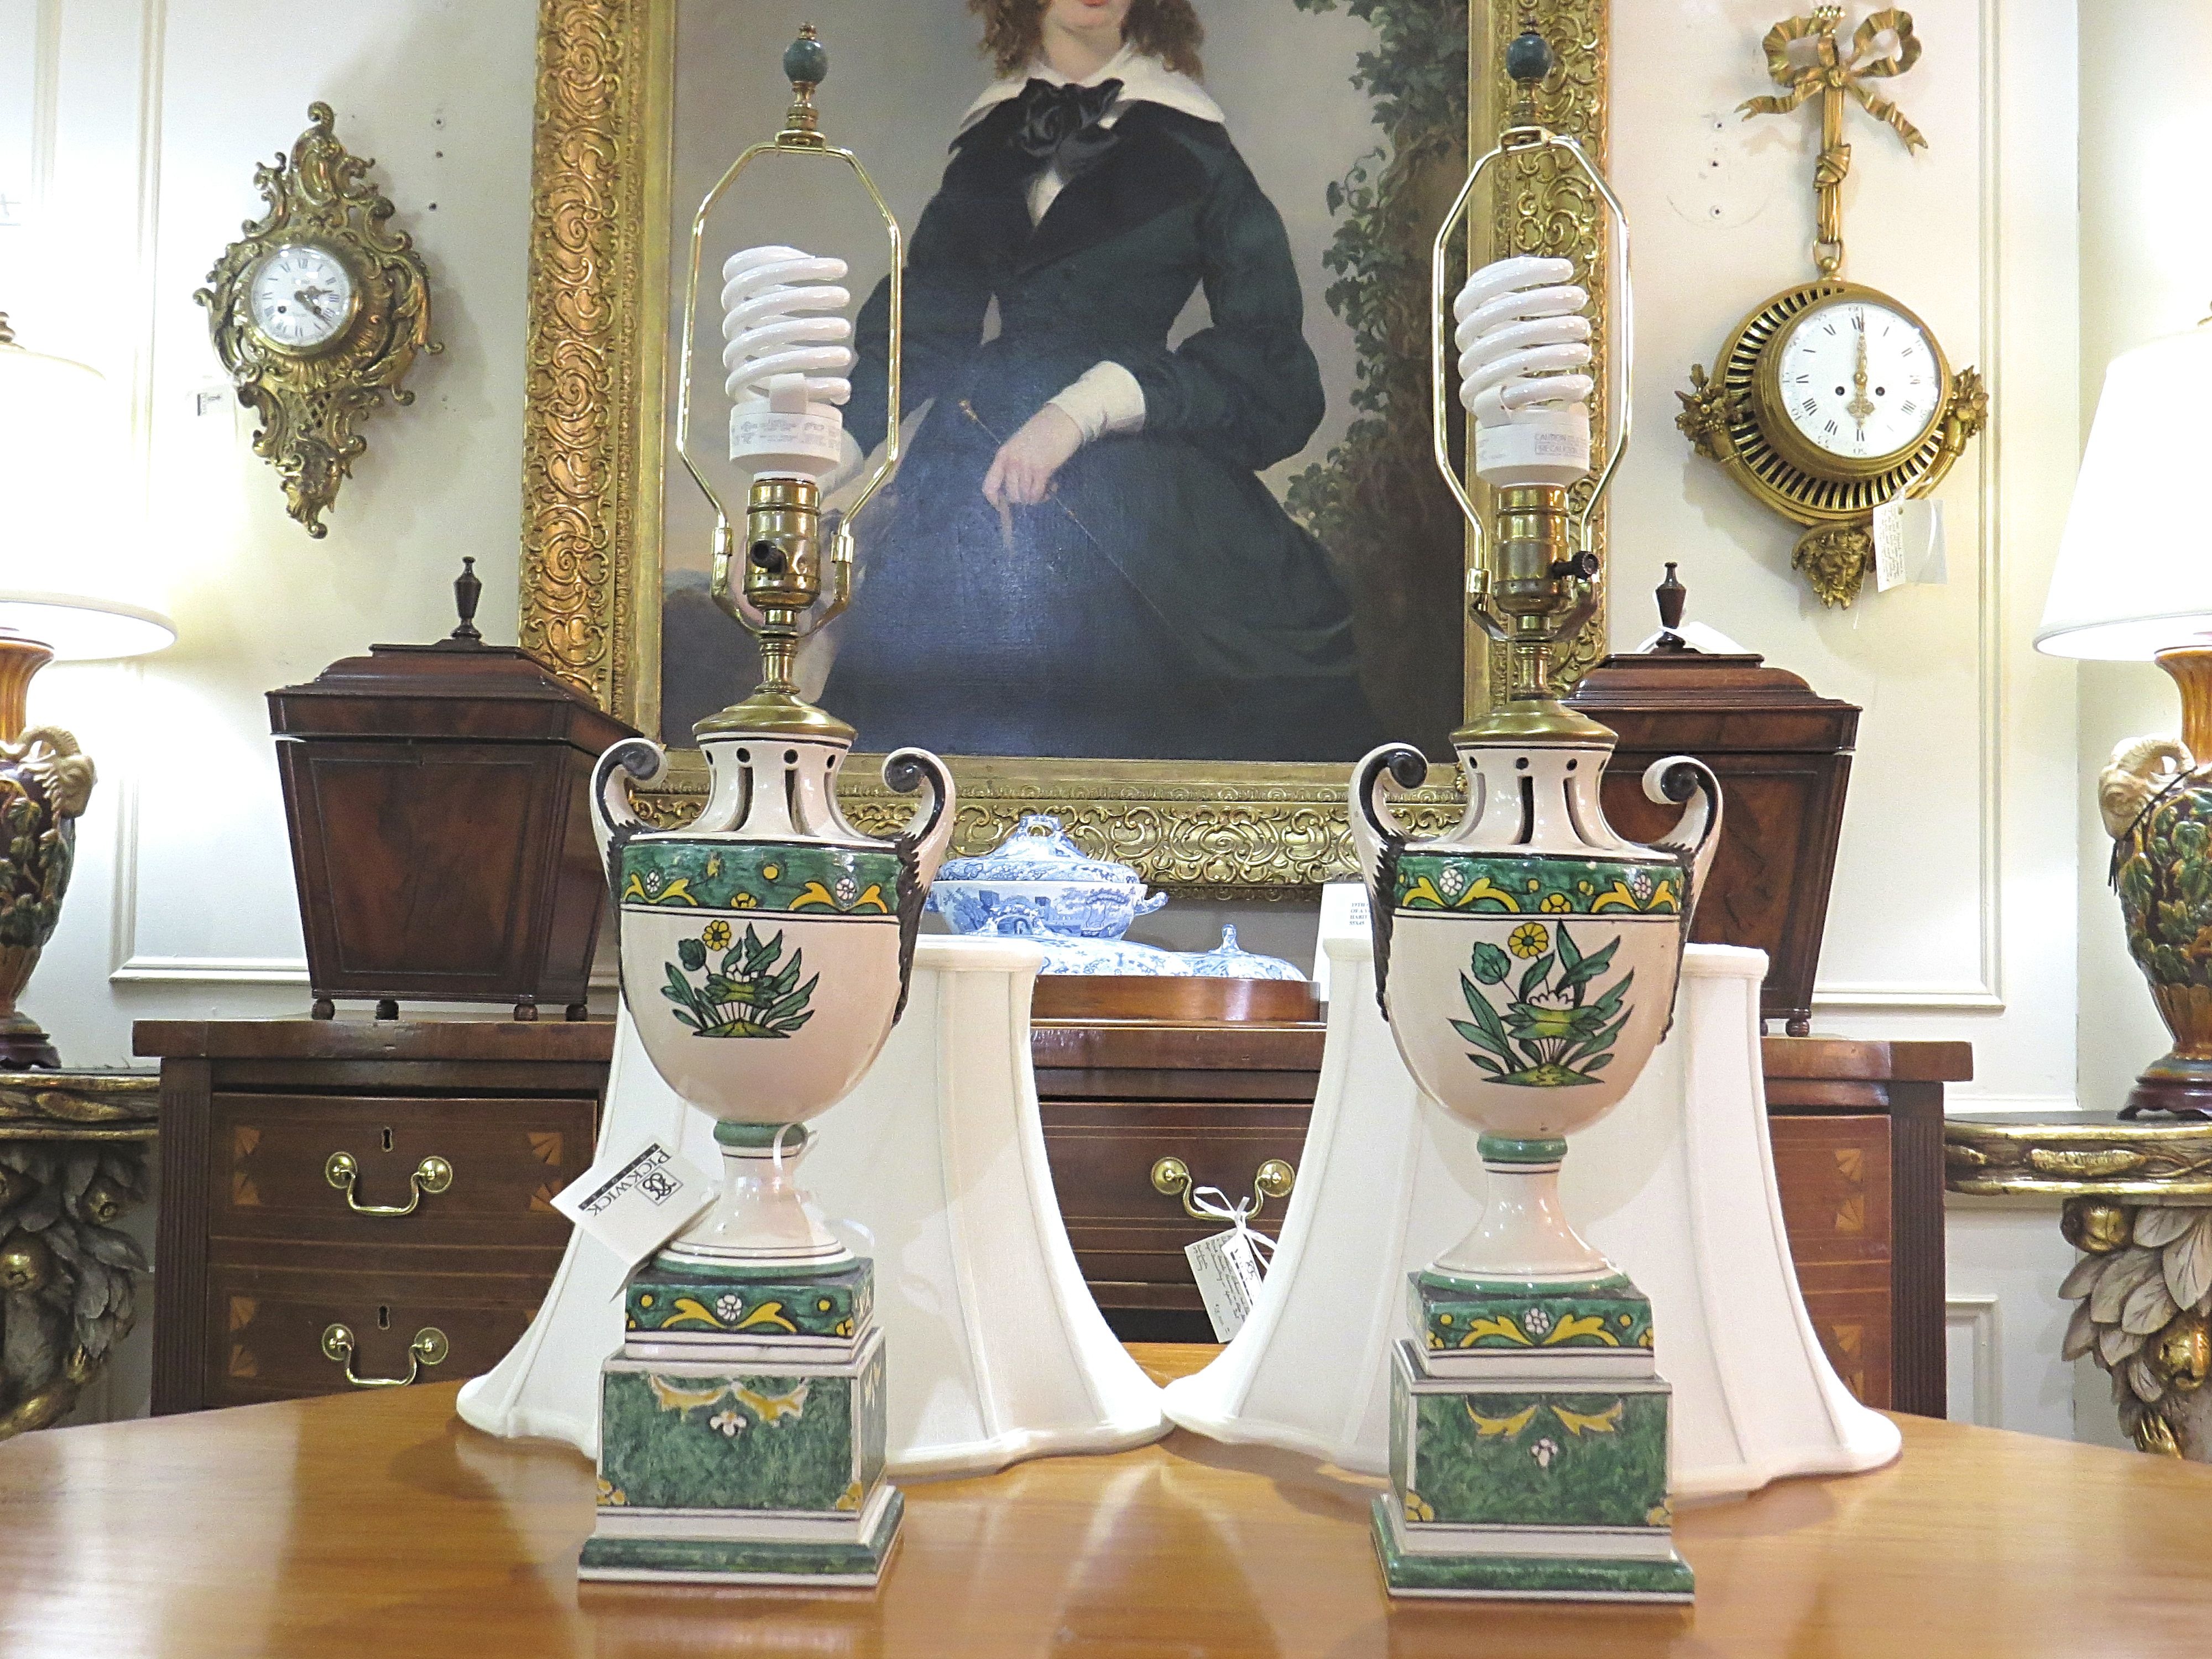 A Pair Of Hand-Painted Italian Lamps